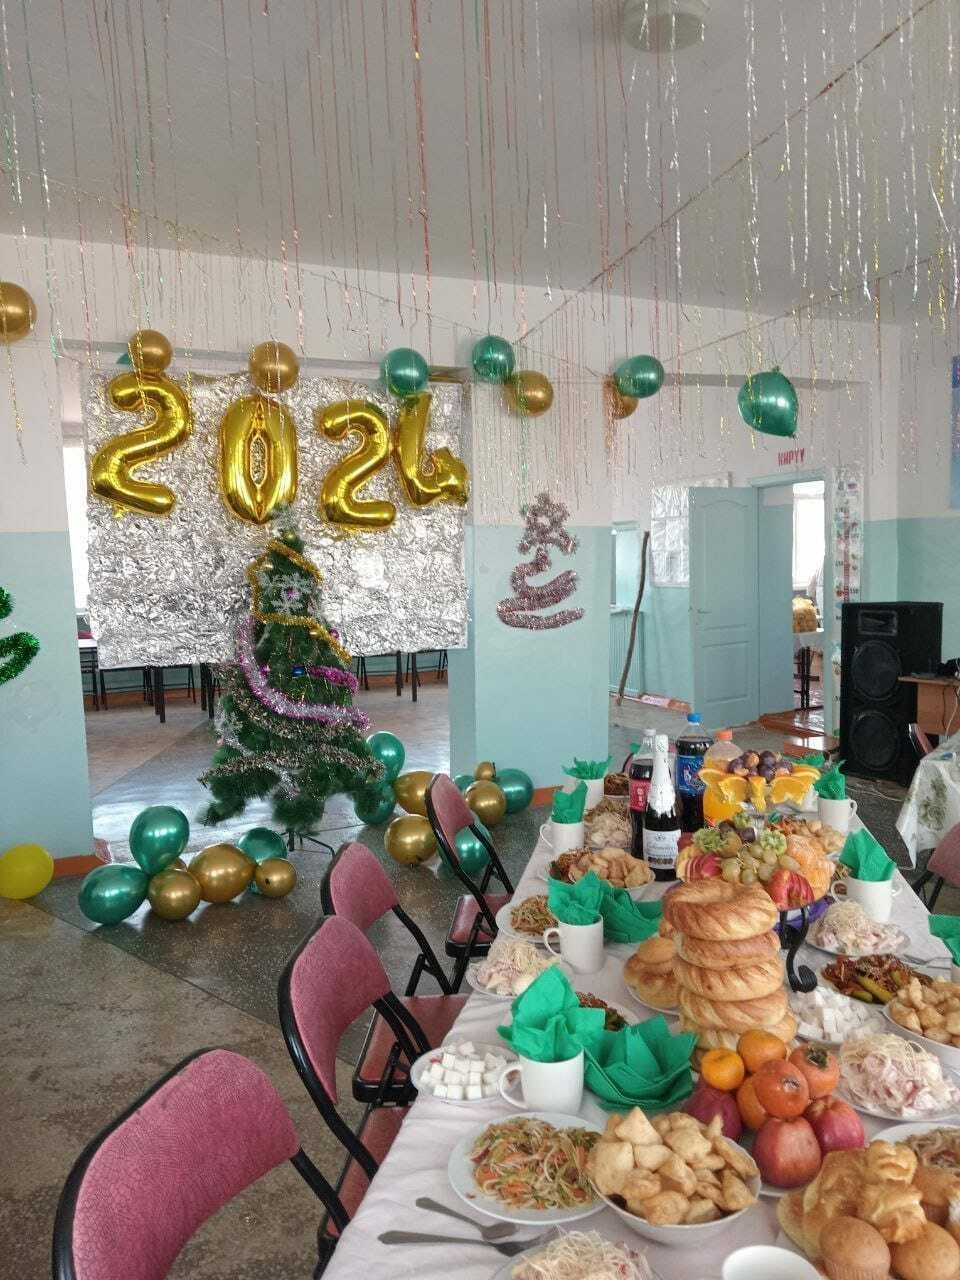 table set with a lot of food; Christmas tree in the background and gold and green balloons on the wall, including big 2 0 2 4 number balloons